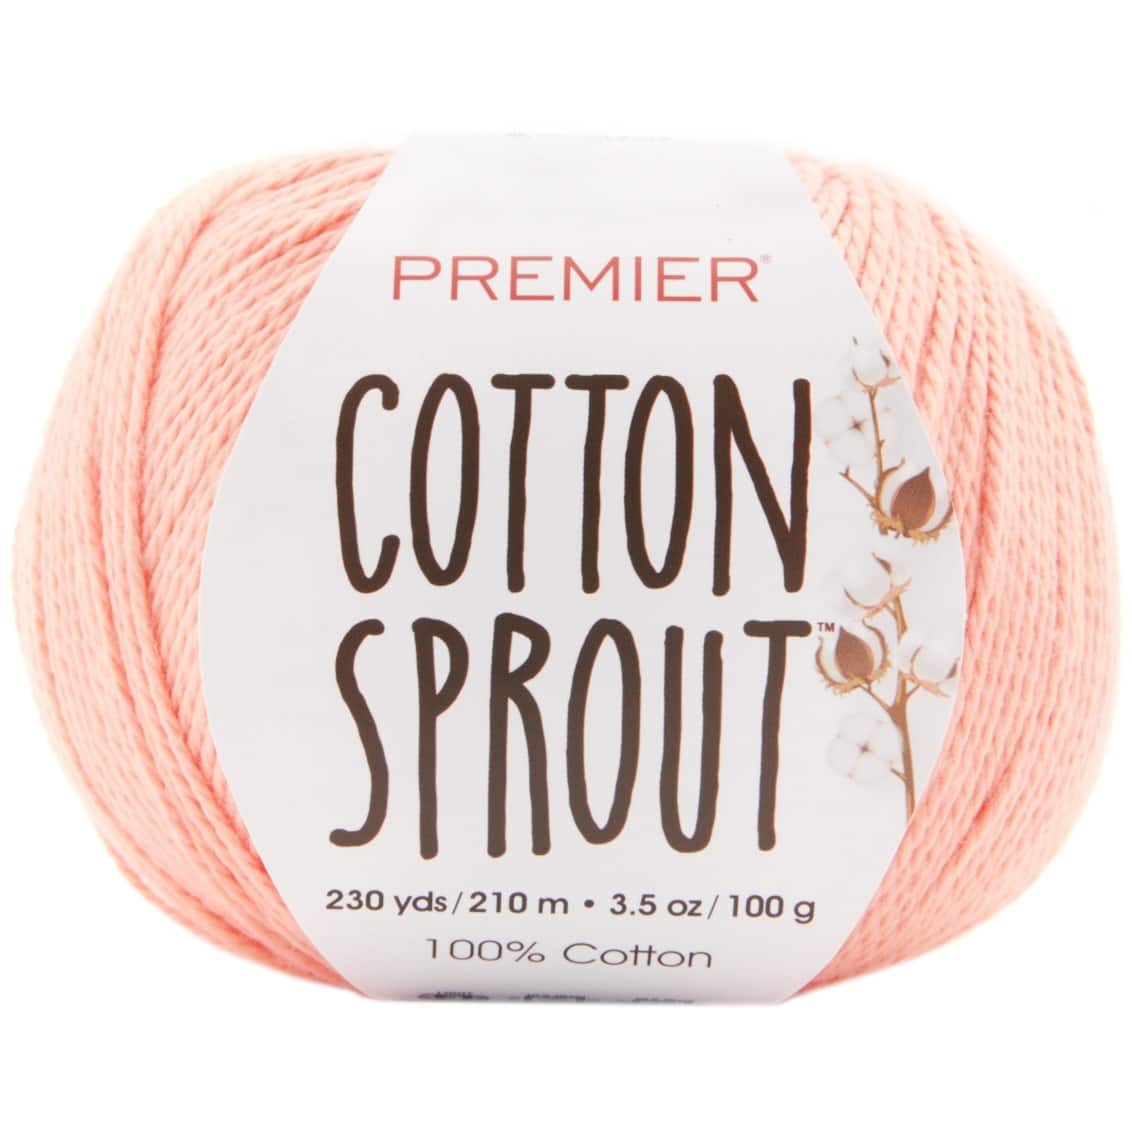 Premier Yarns Cotton Sprout DK, Natural Cotton Yarn, Machine-Washable, DK  Yarn for Crocheting and Knitting, Bright Pink, 3.5 oz, 230 Yards